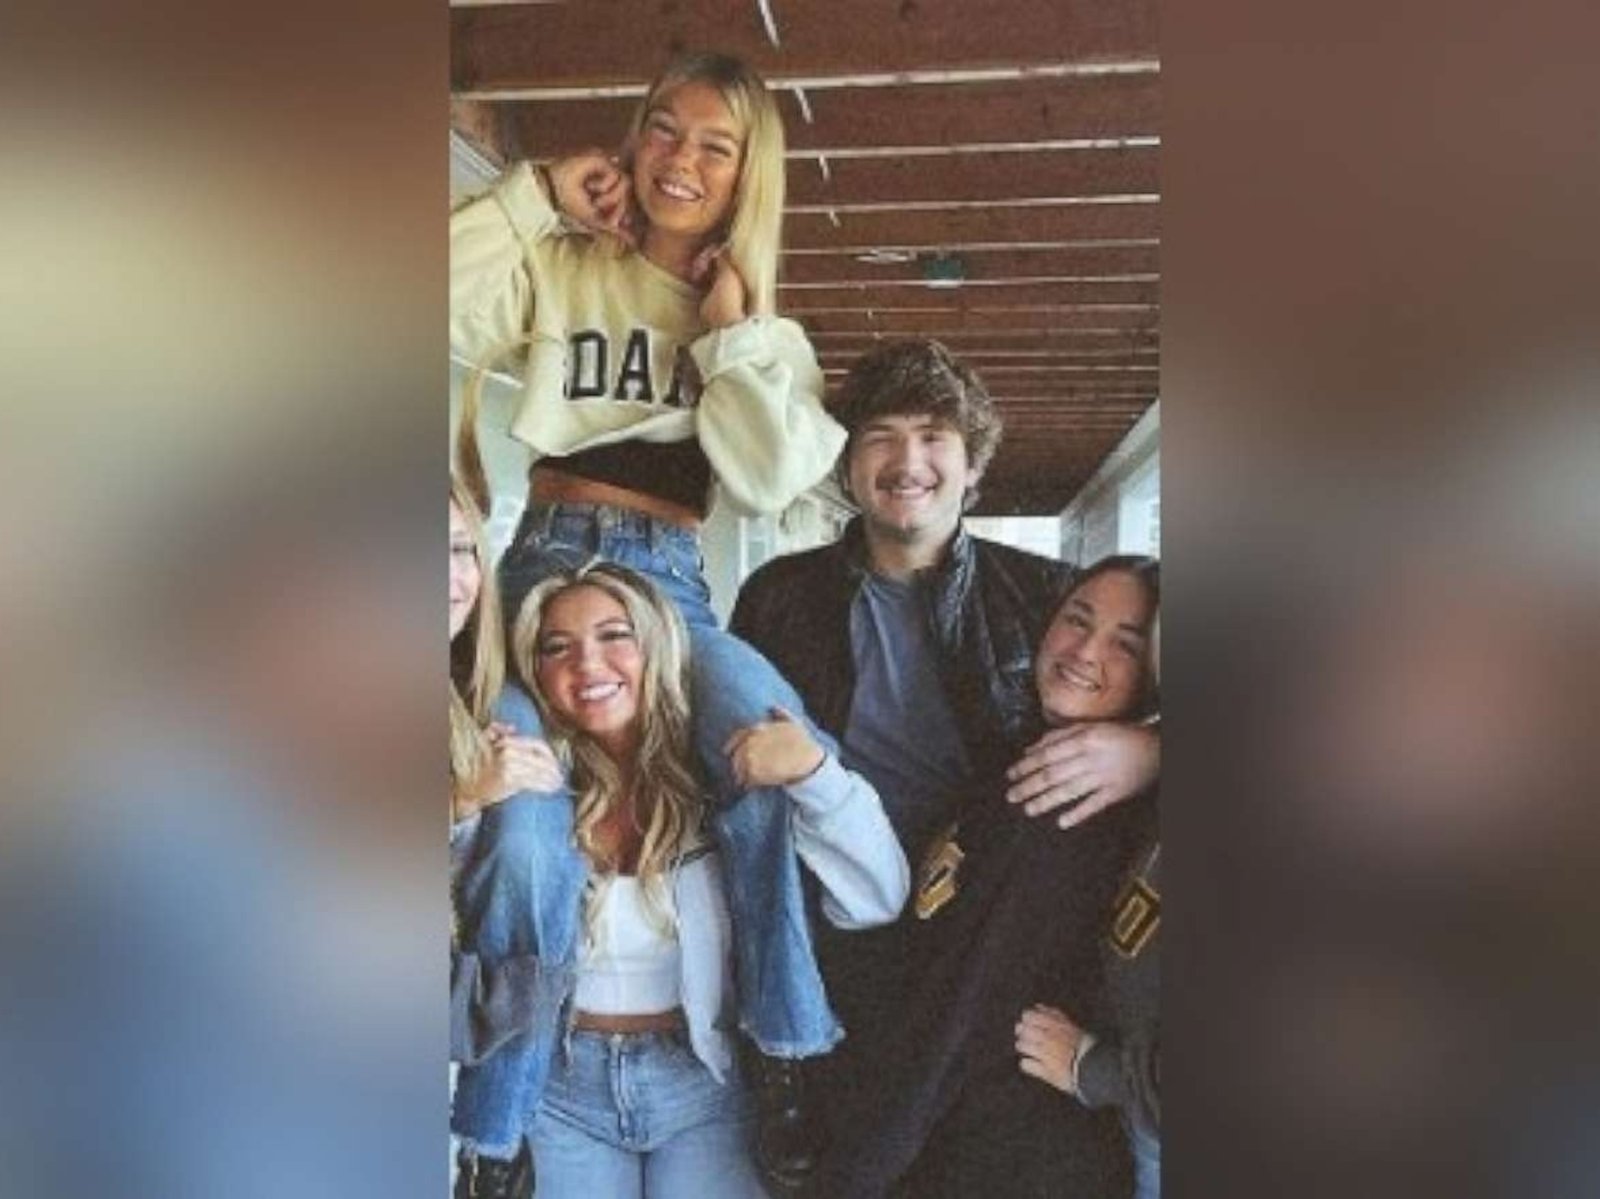 PHOTO: A photo posted by Kaylee Goncalves shows University of Idaho students Ethan Chapin, Xana Kernodle, Madison Mogen and Goncalves.  The four were found dead at an off-campus house on Nov. 13, 2022.